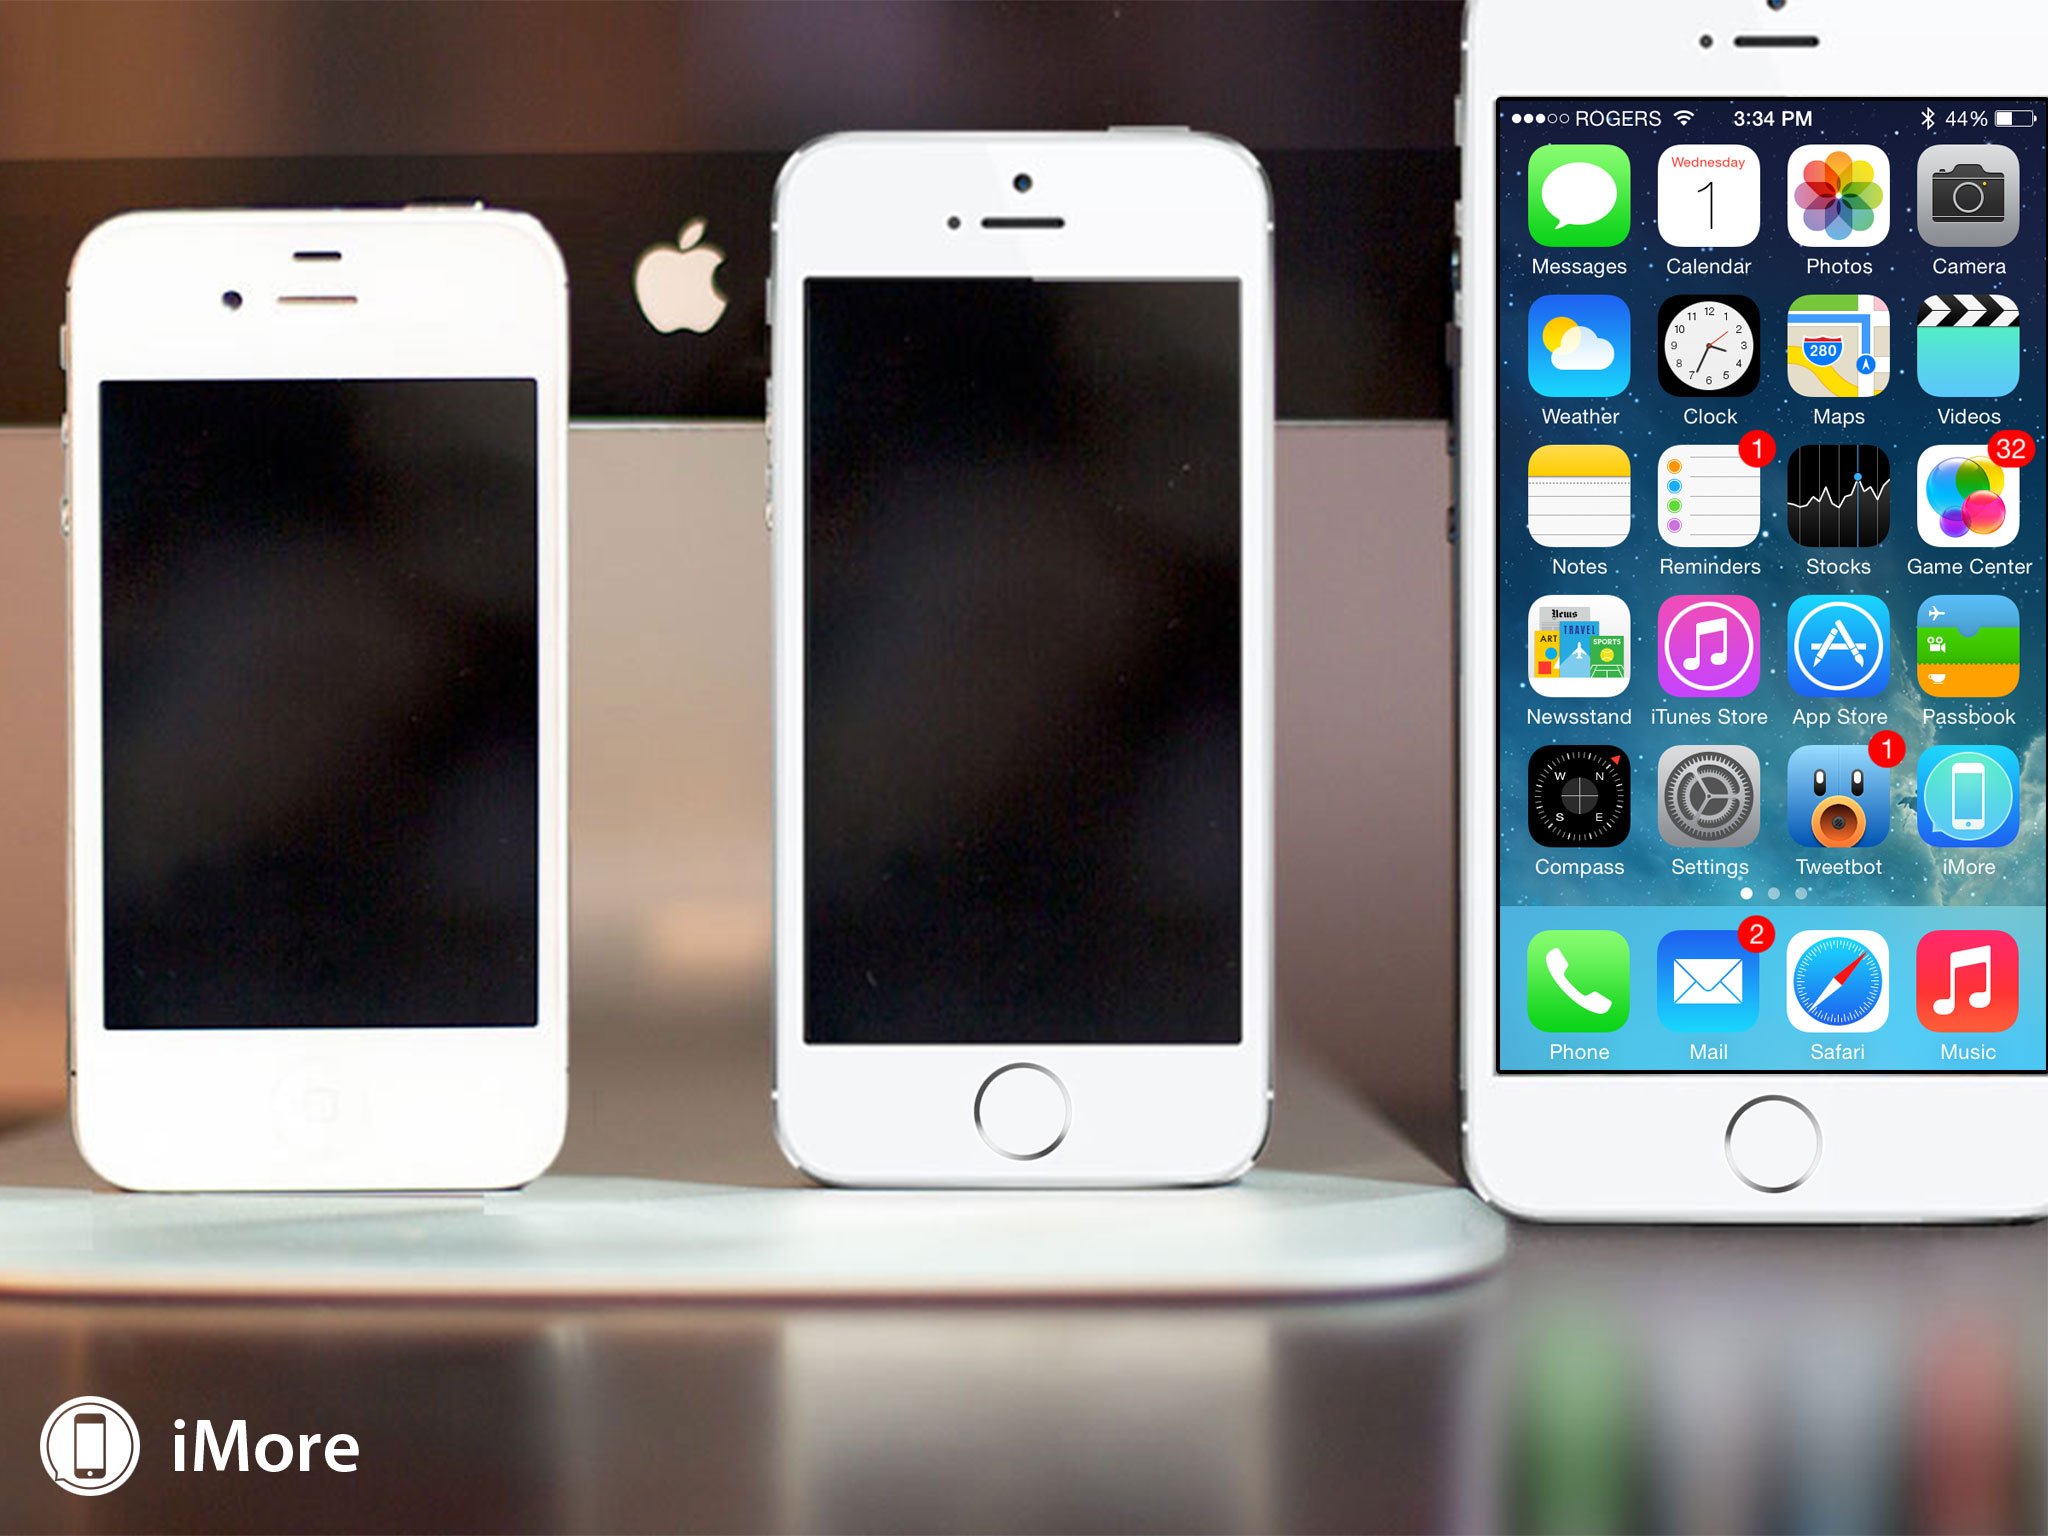 Profeet Tropisch Heel 4 or 4.7 or 5.5-inches — What's the perfect iPhone 6 size for you? [Poll] |  iMore